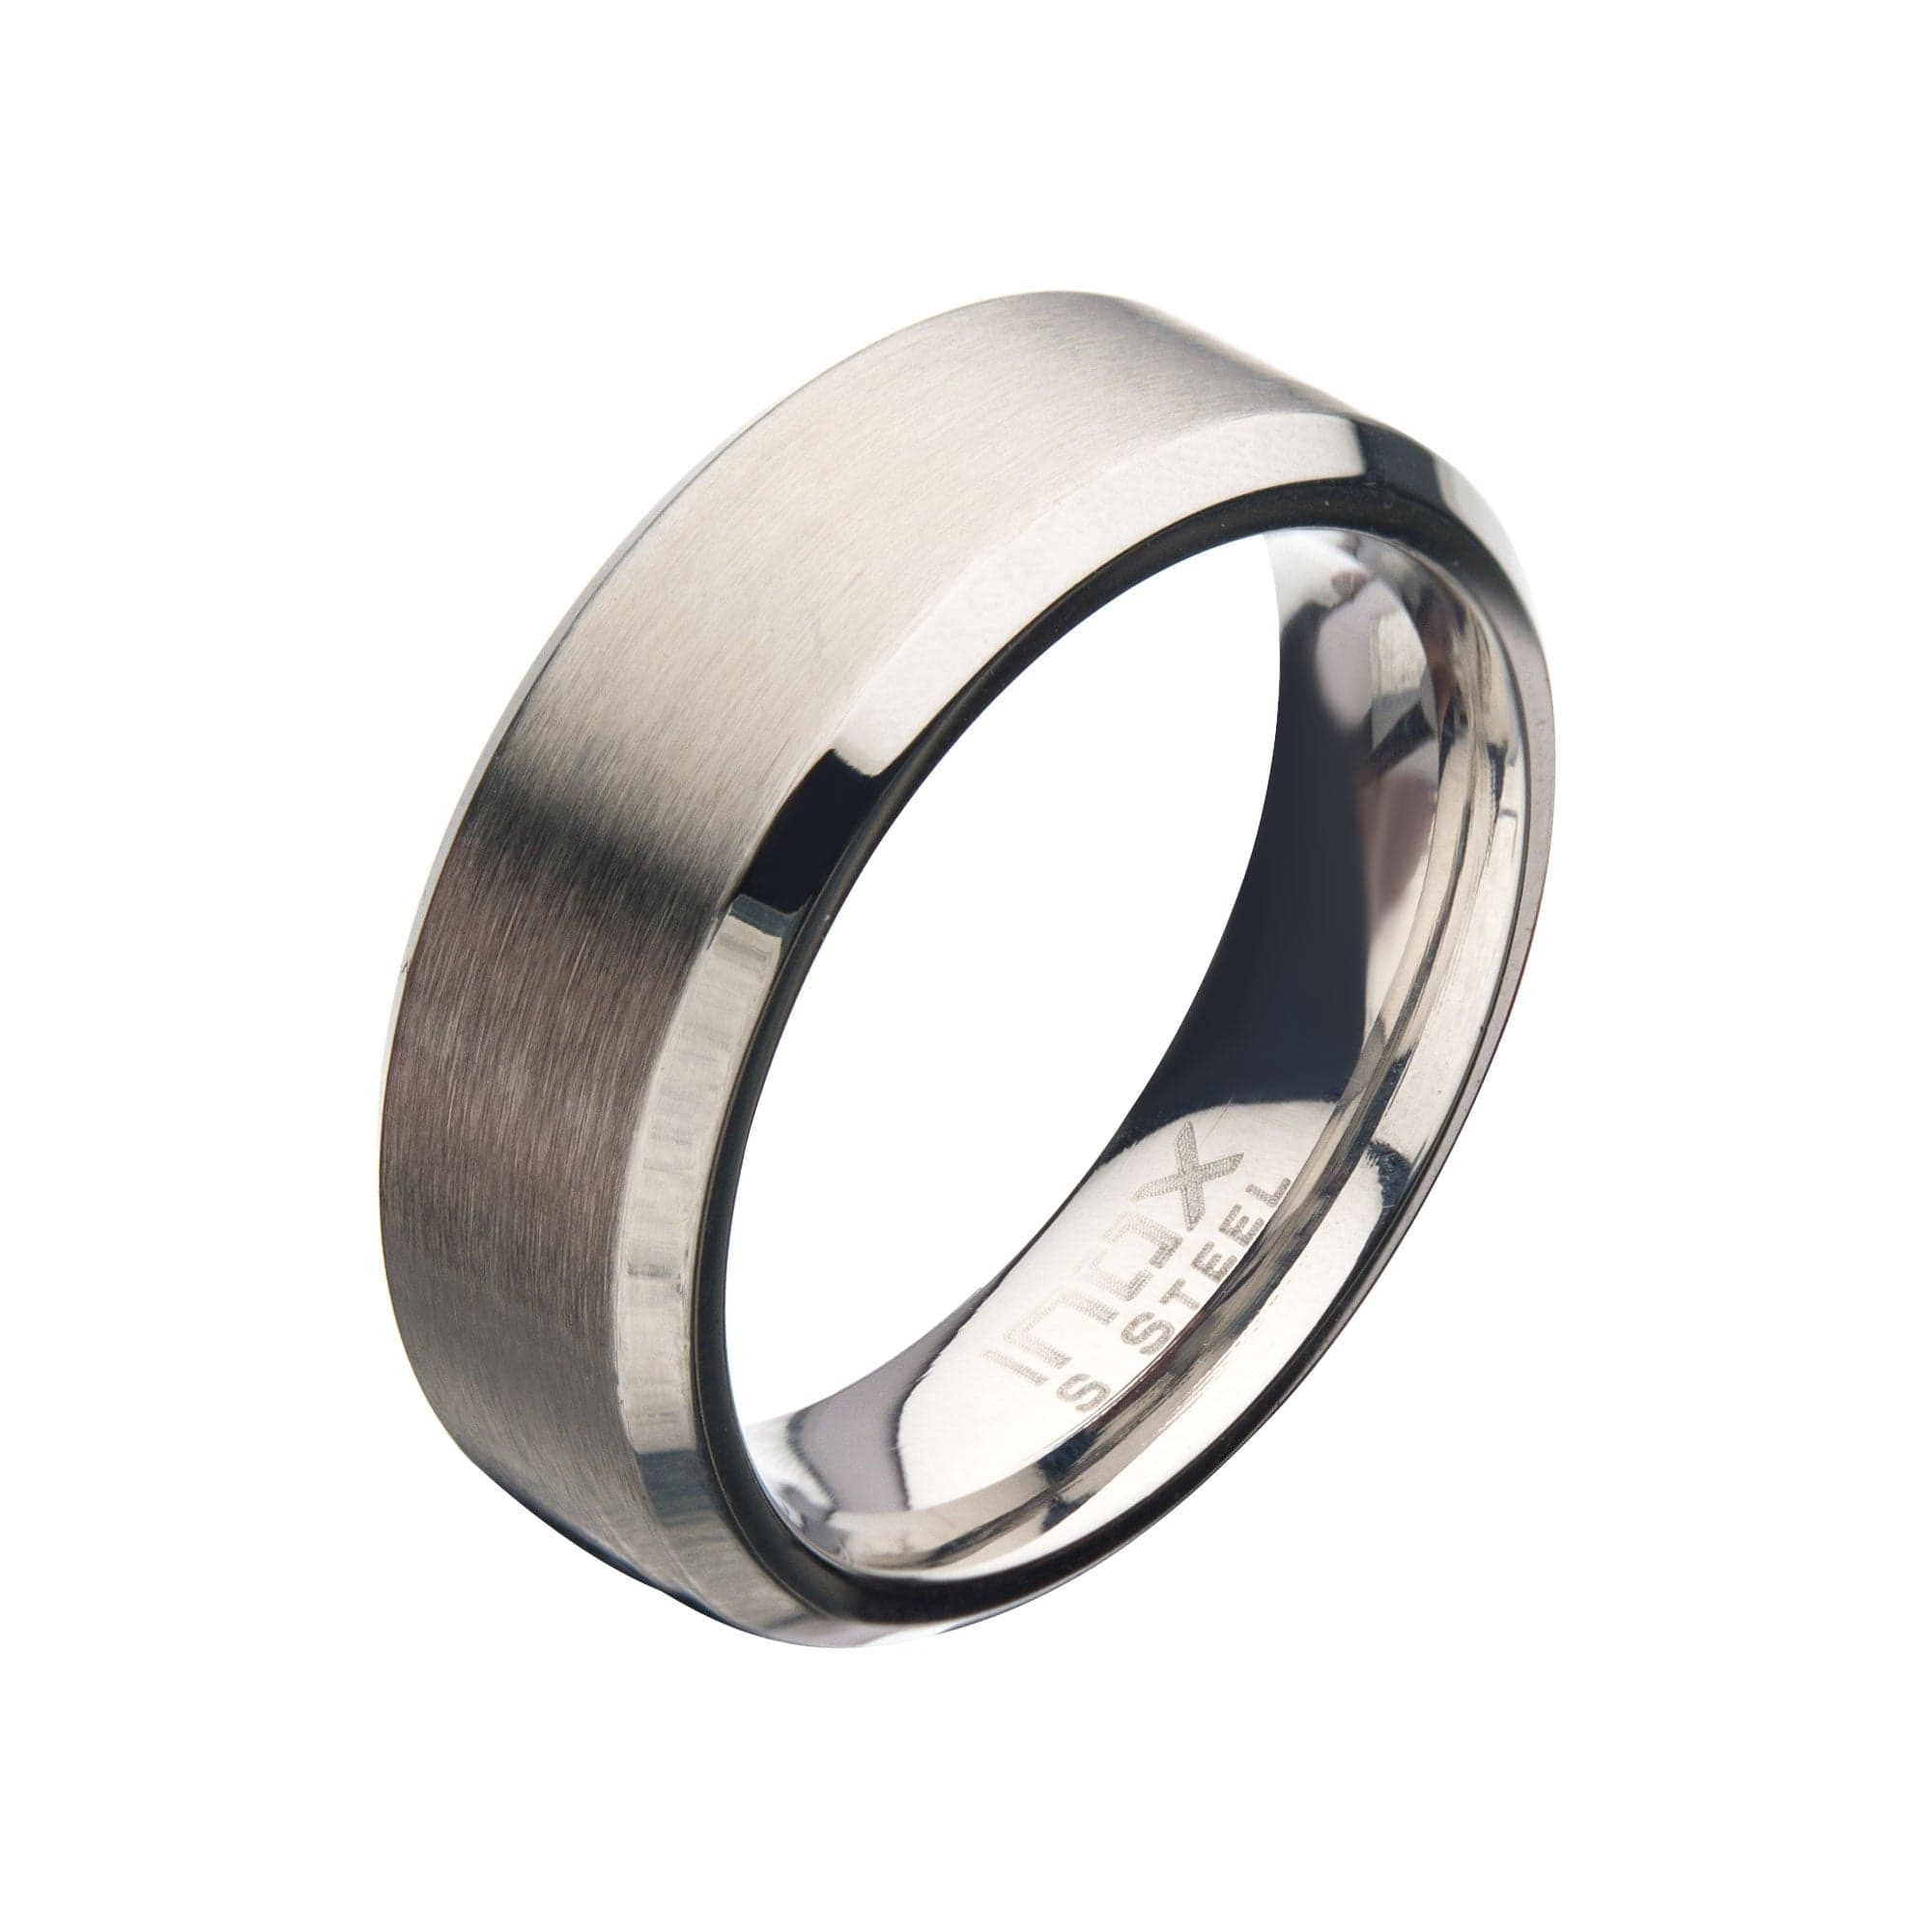 INOX JEWELRY Rings Silver Tone Stainless Steel 8mm Matte Finish Beveled Wedding Band Ring